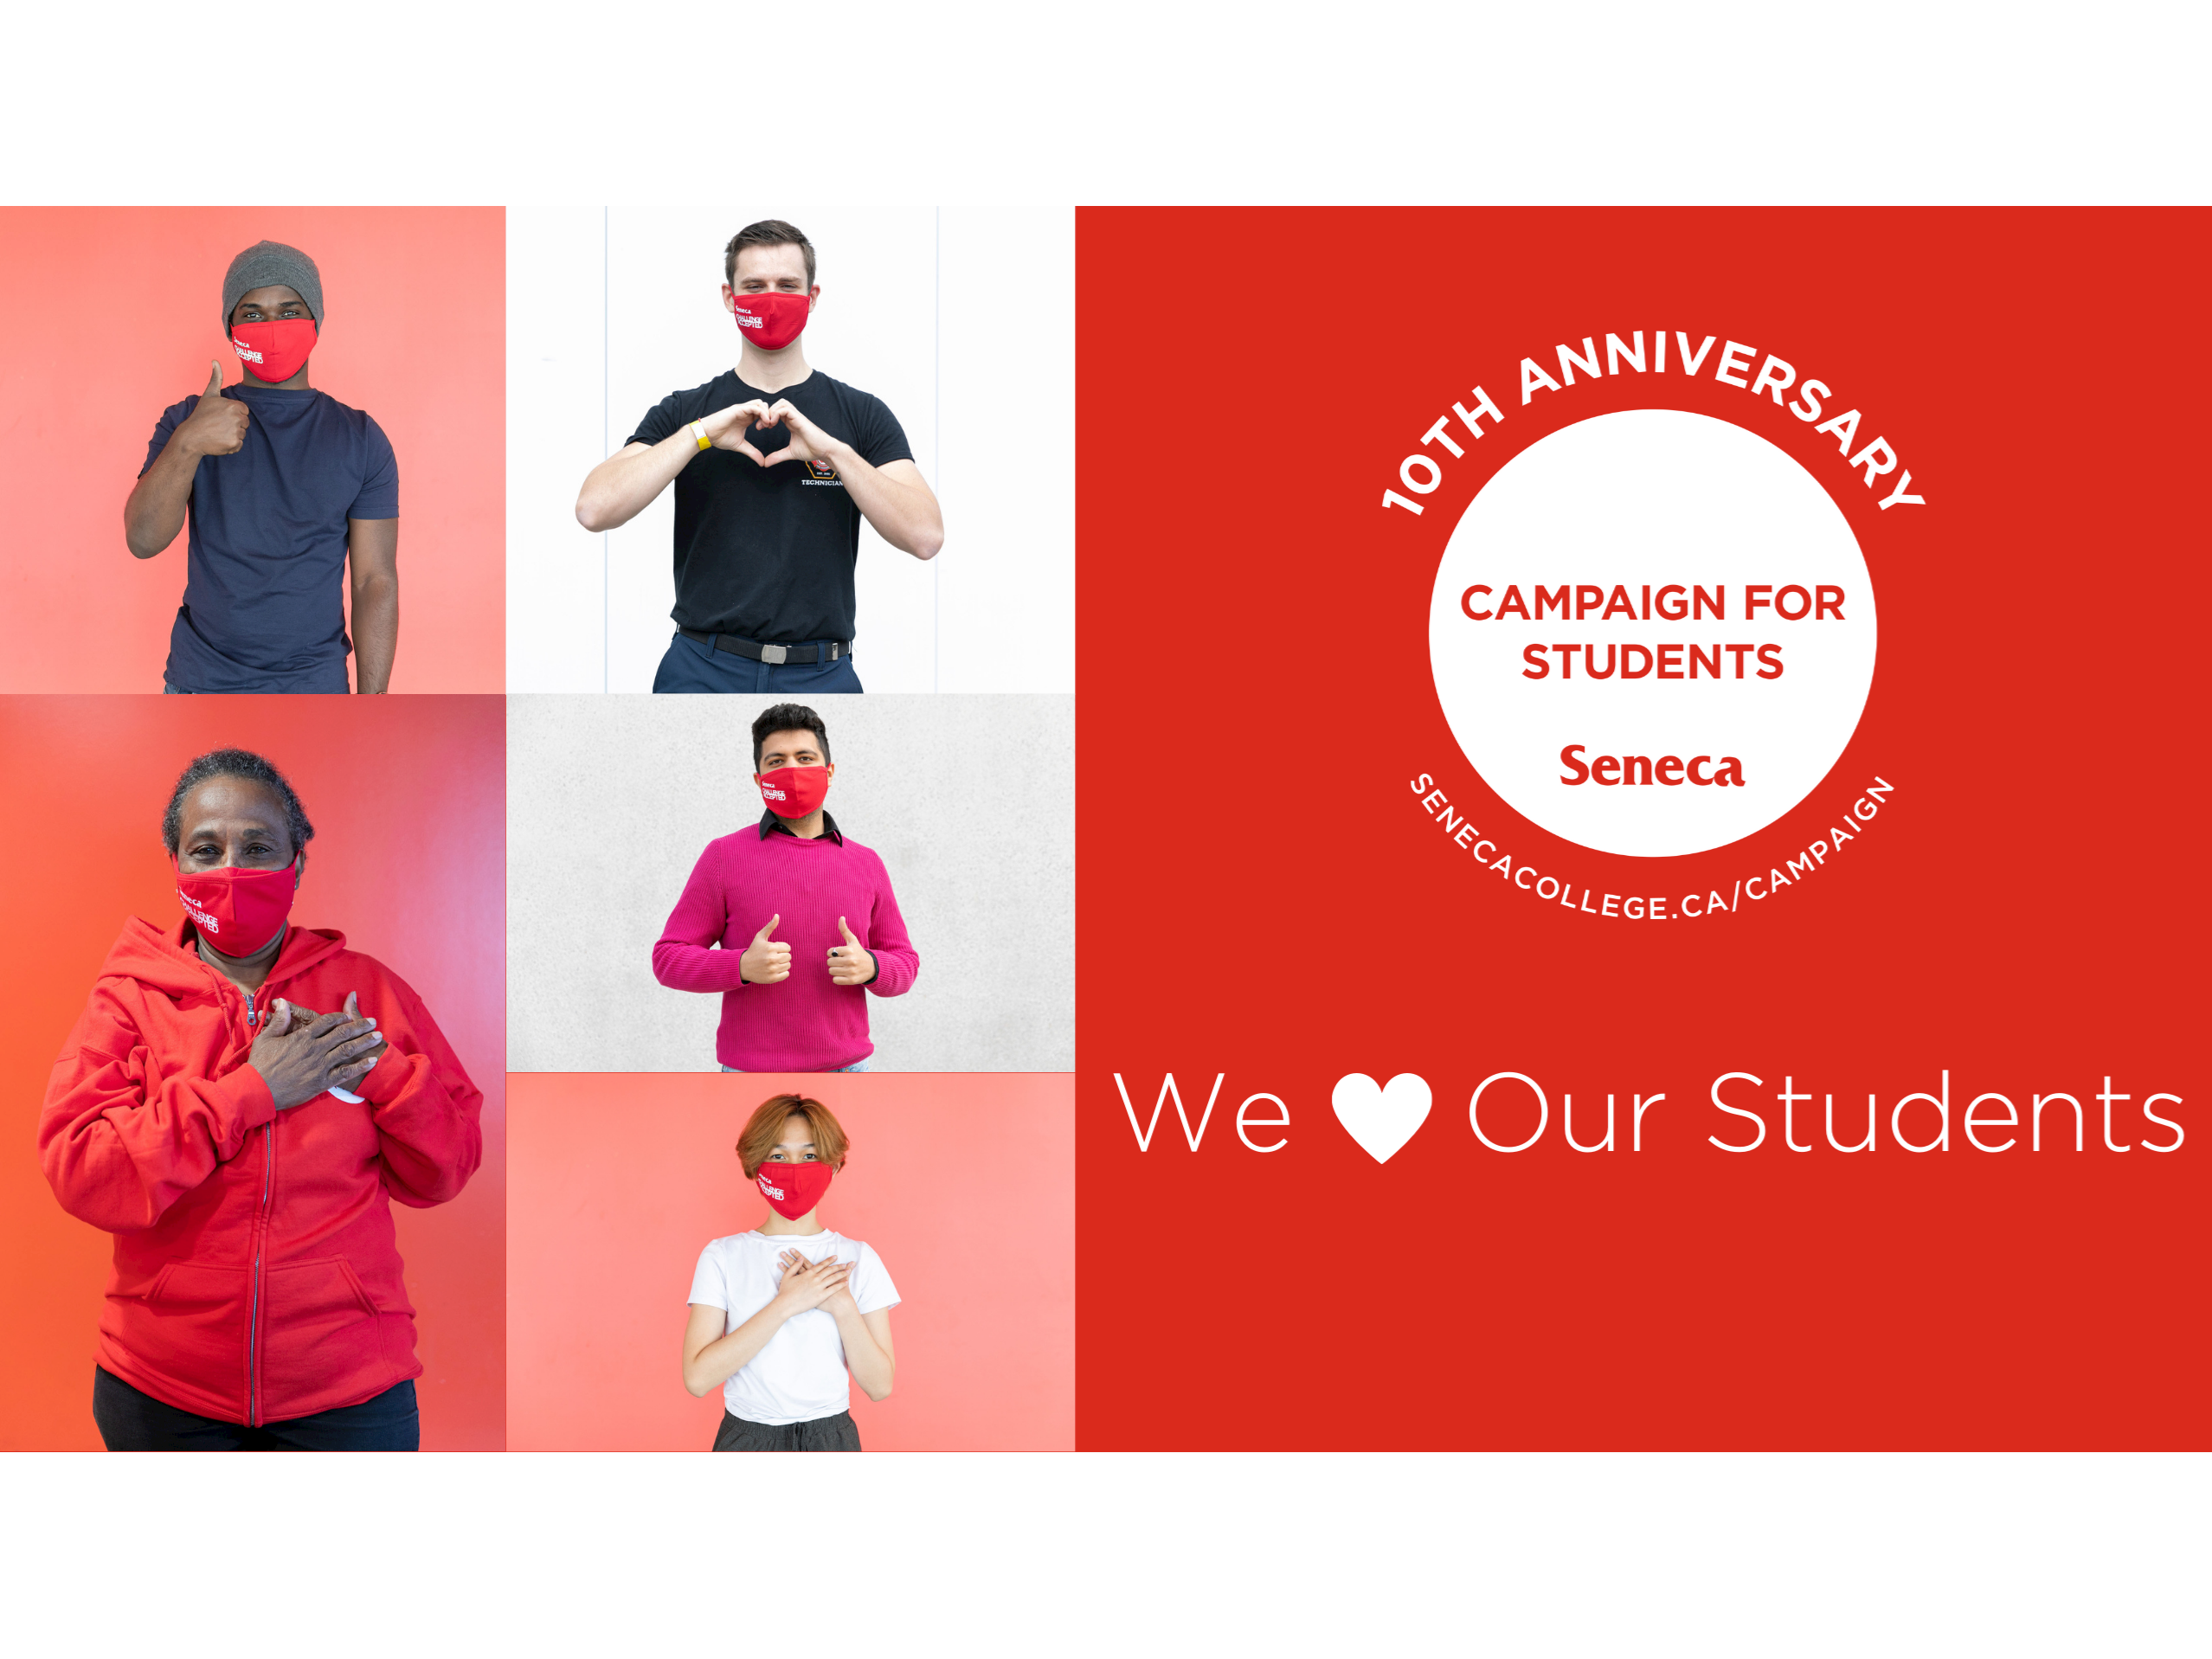 Campaign for Students turns 10